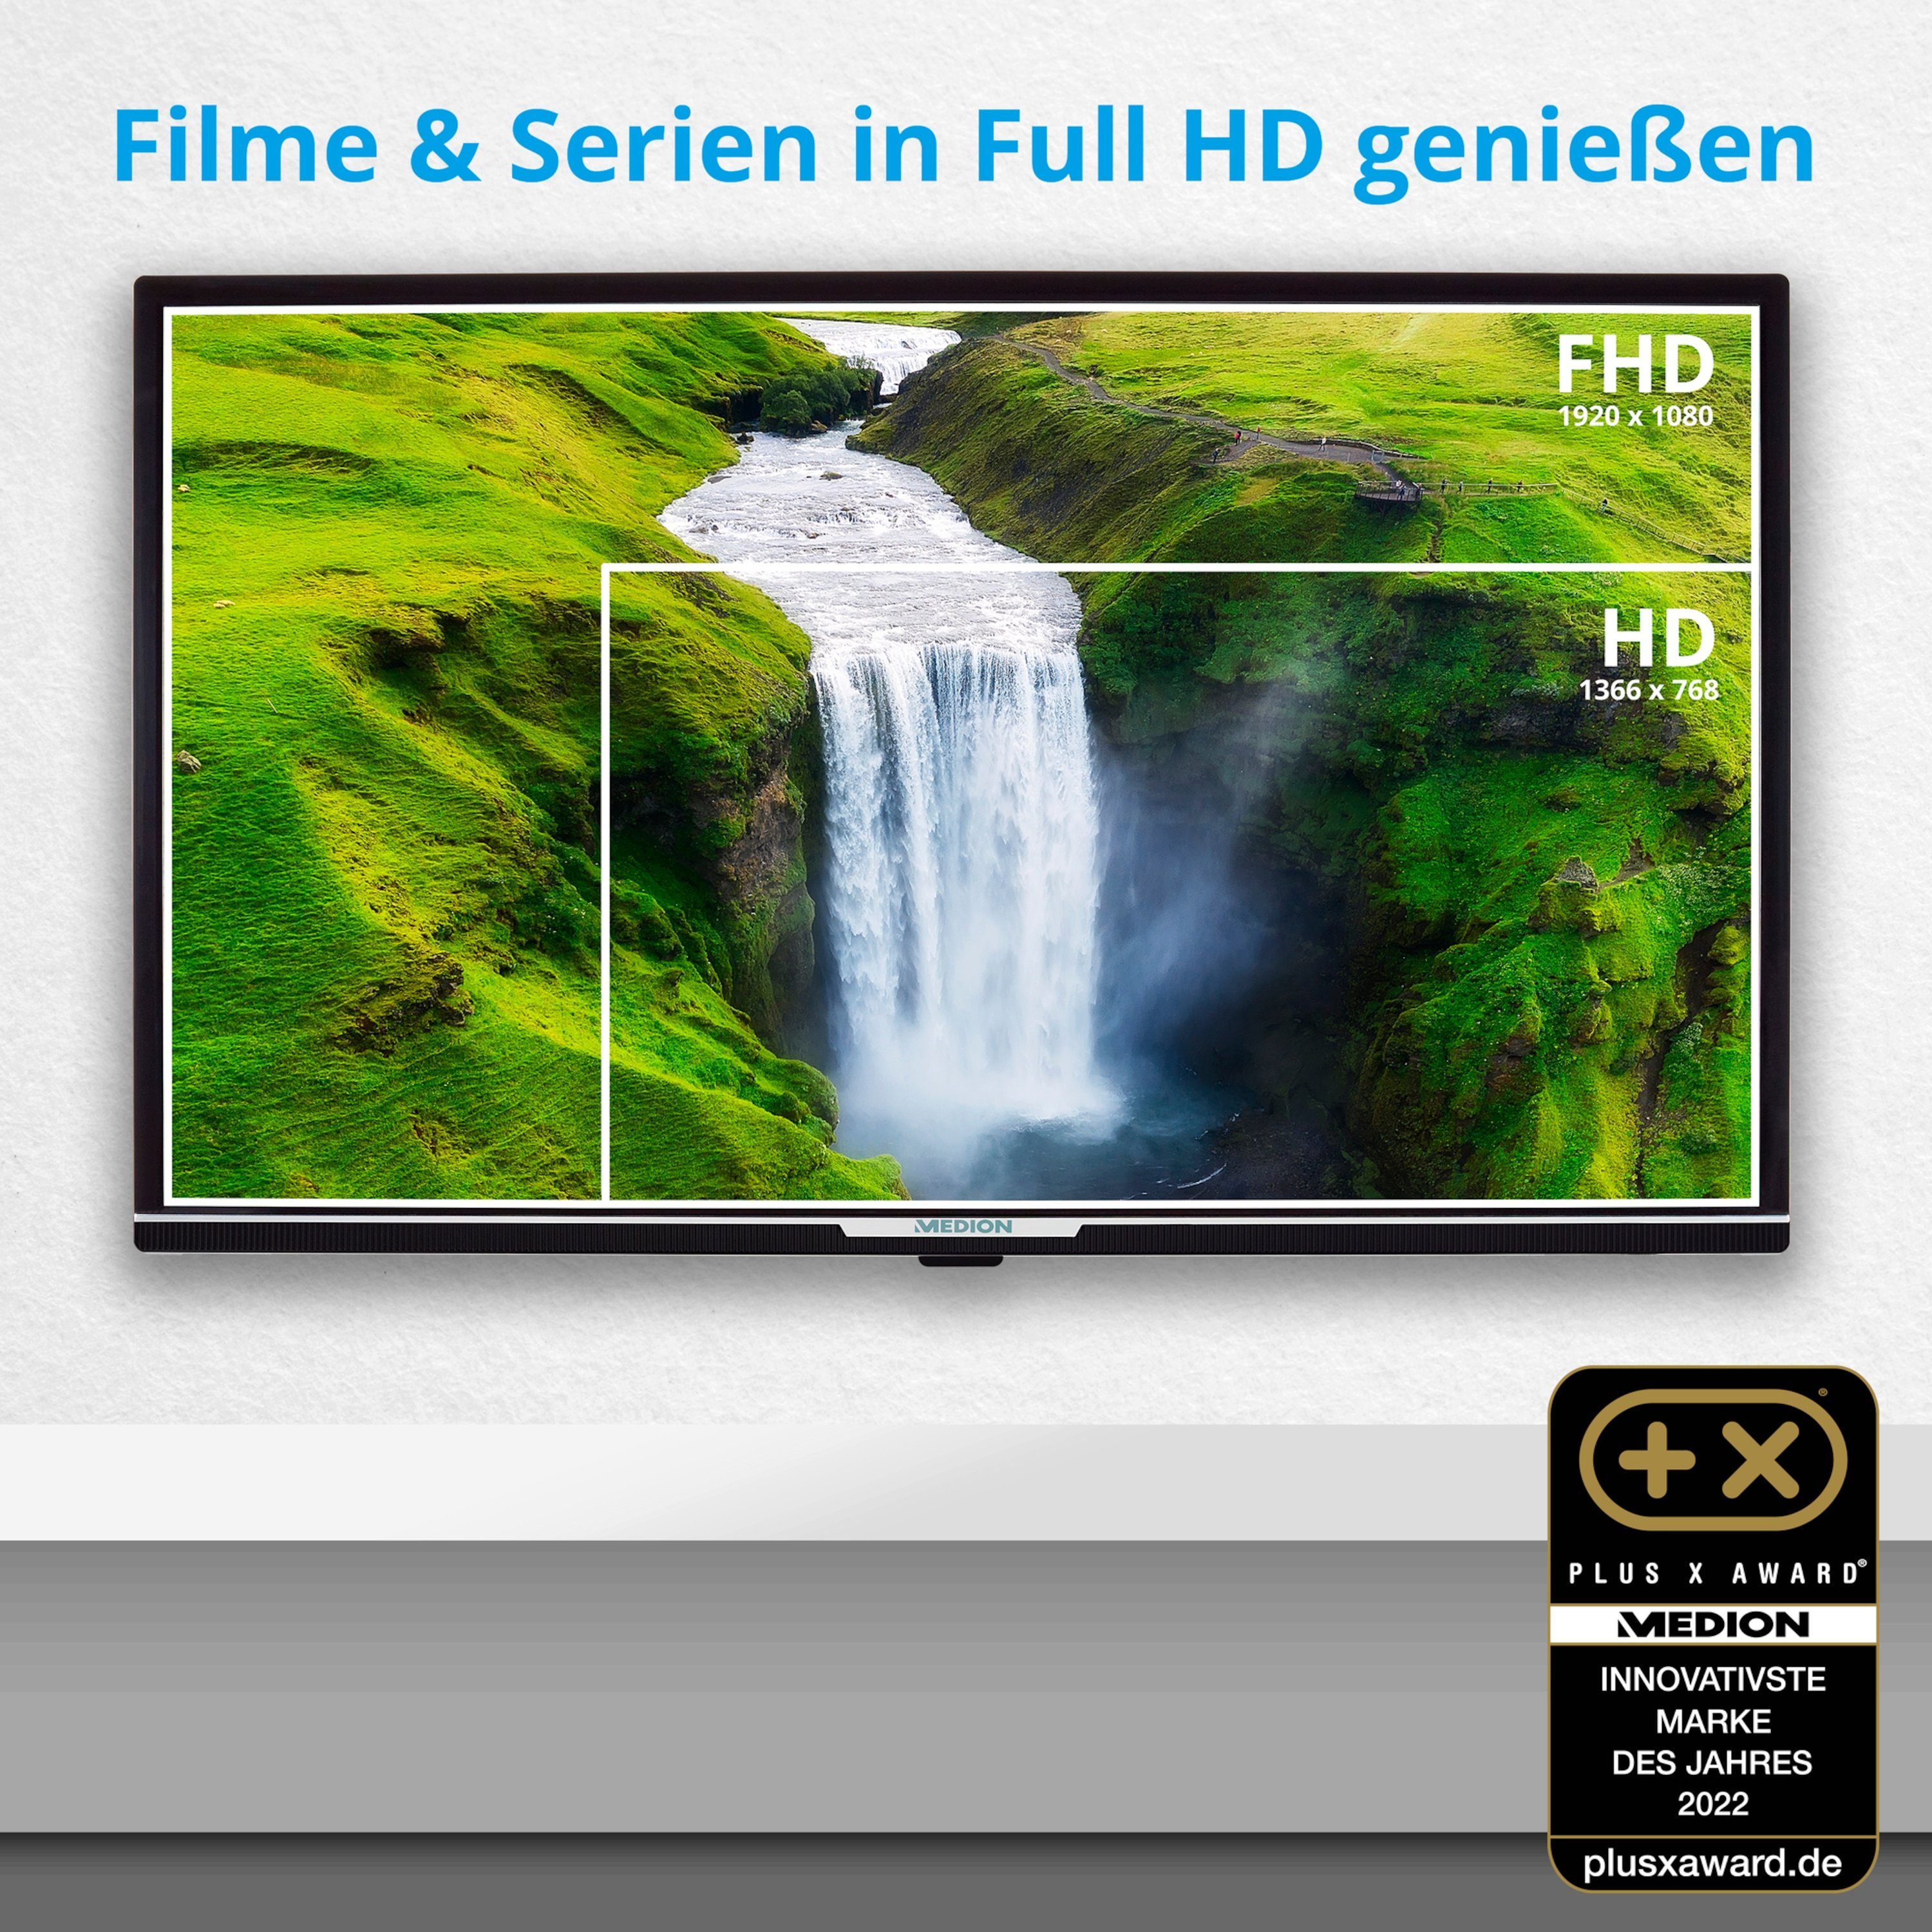 Medion® MD30042 Zoll, LED-Fernseher MD30042) cm/31.5 Display (80 Full 1080p Full-HD TV, 60Hz, Android HD